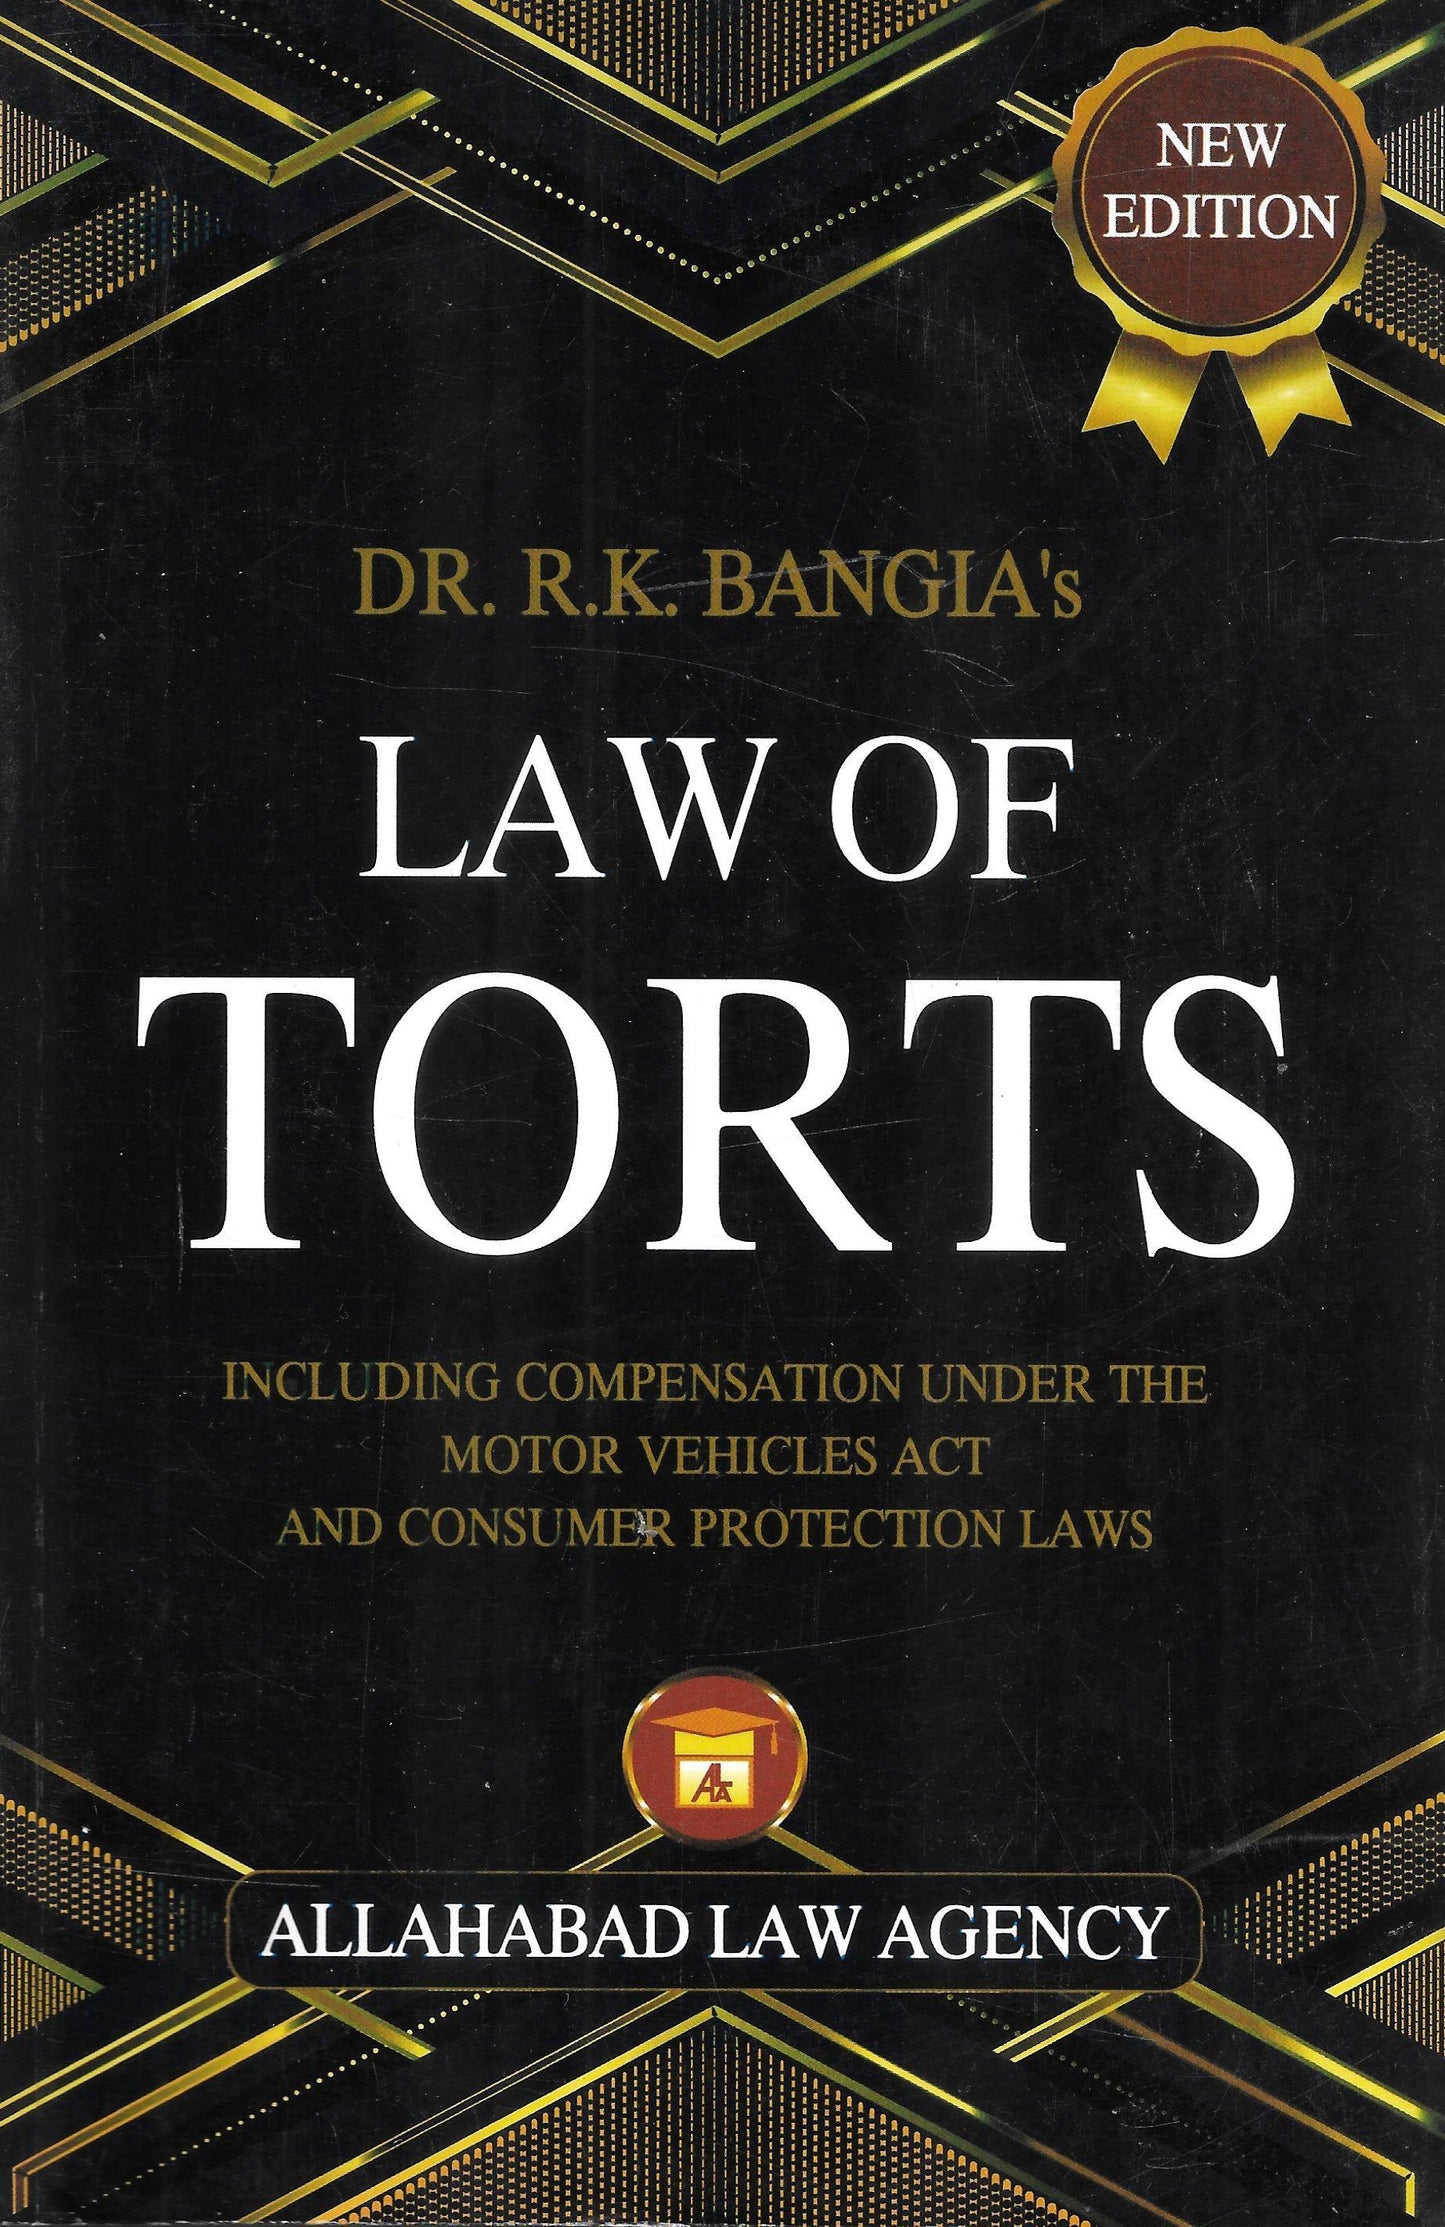 Law Of Torts Including Compensation Under The Motor Vehicles Act And Consumer Protection Laws - M&J Services